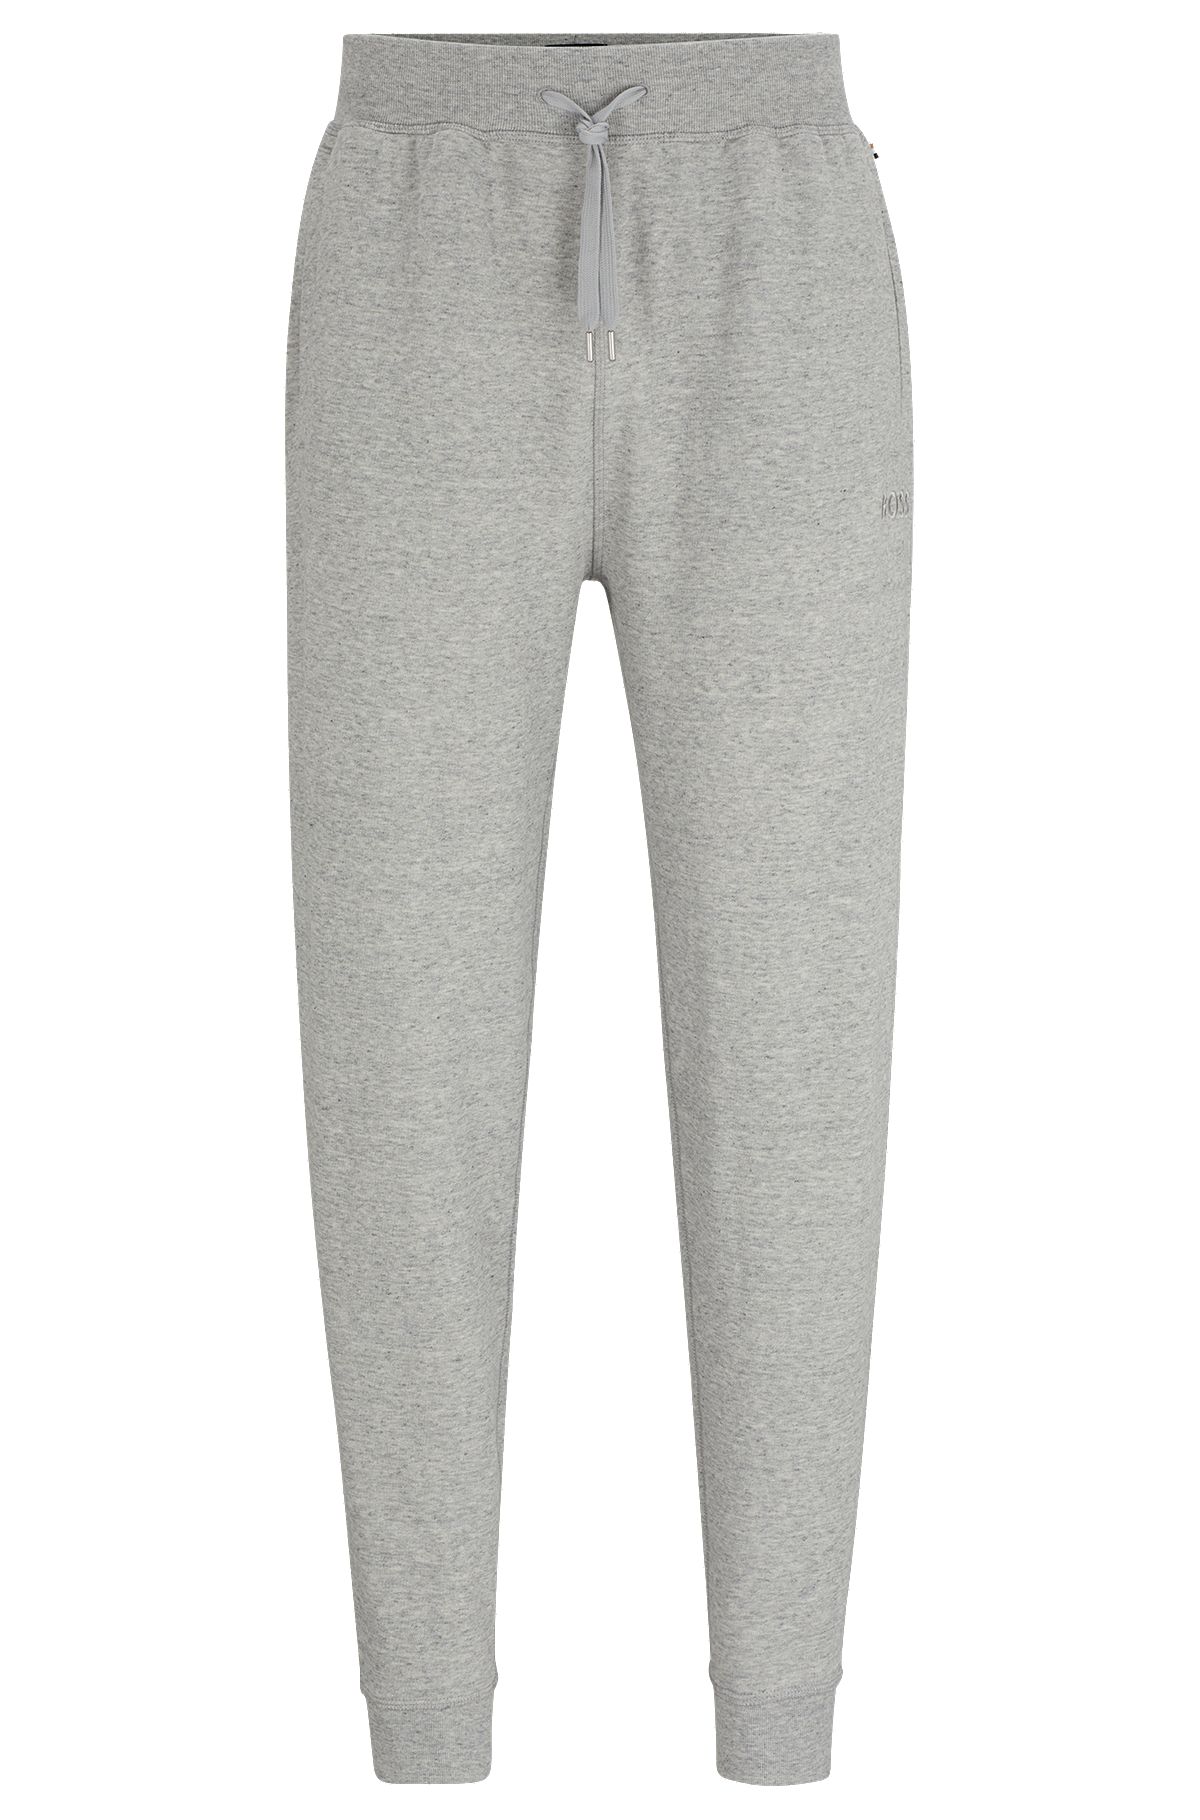 Tracksuit bottoms with embroidered logo, Grey